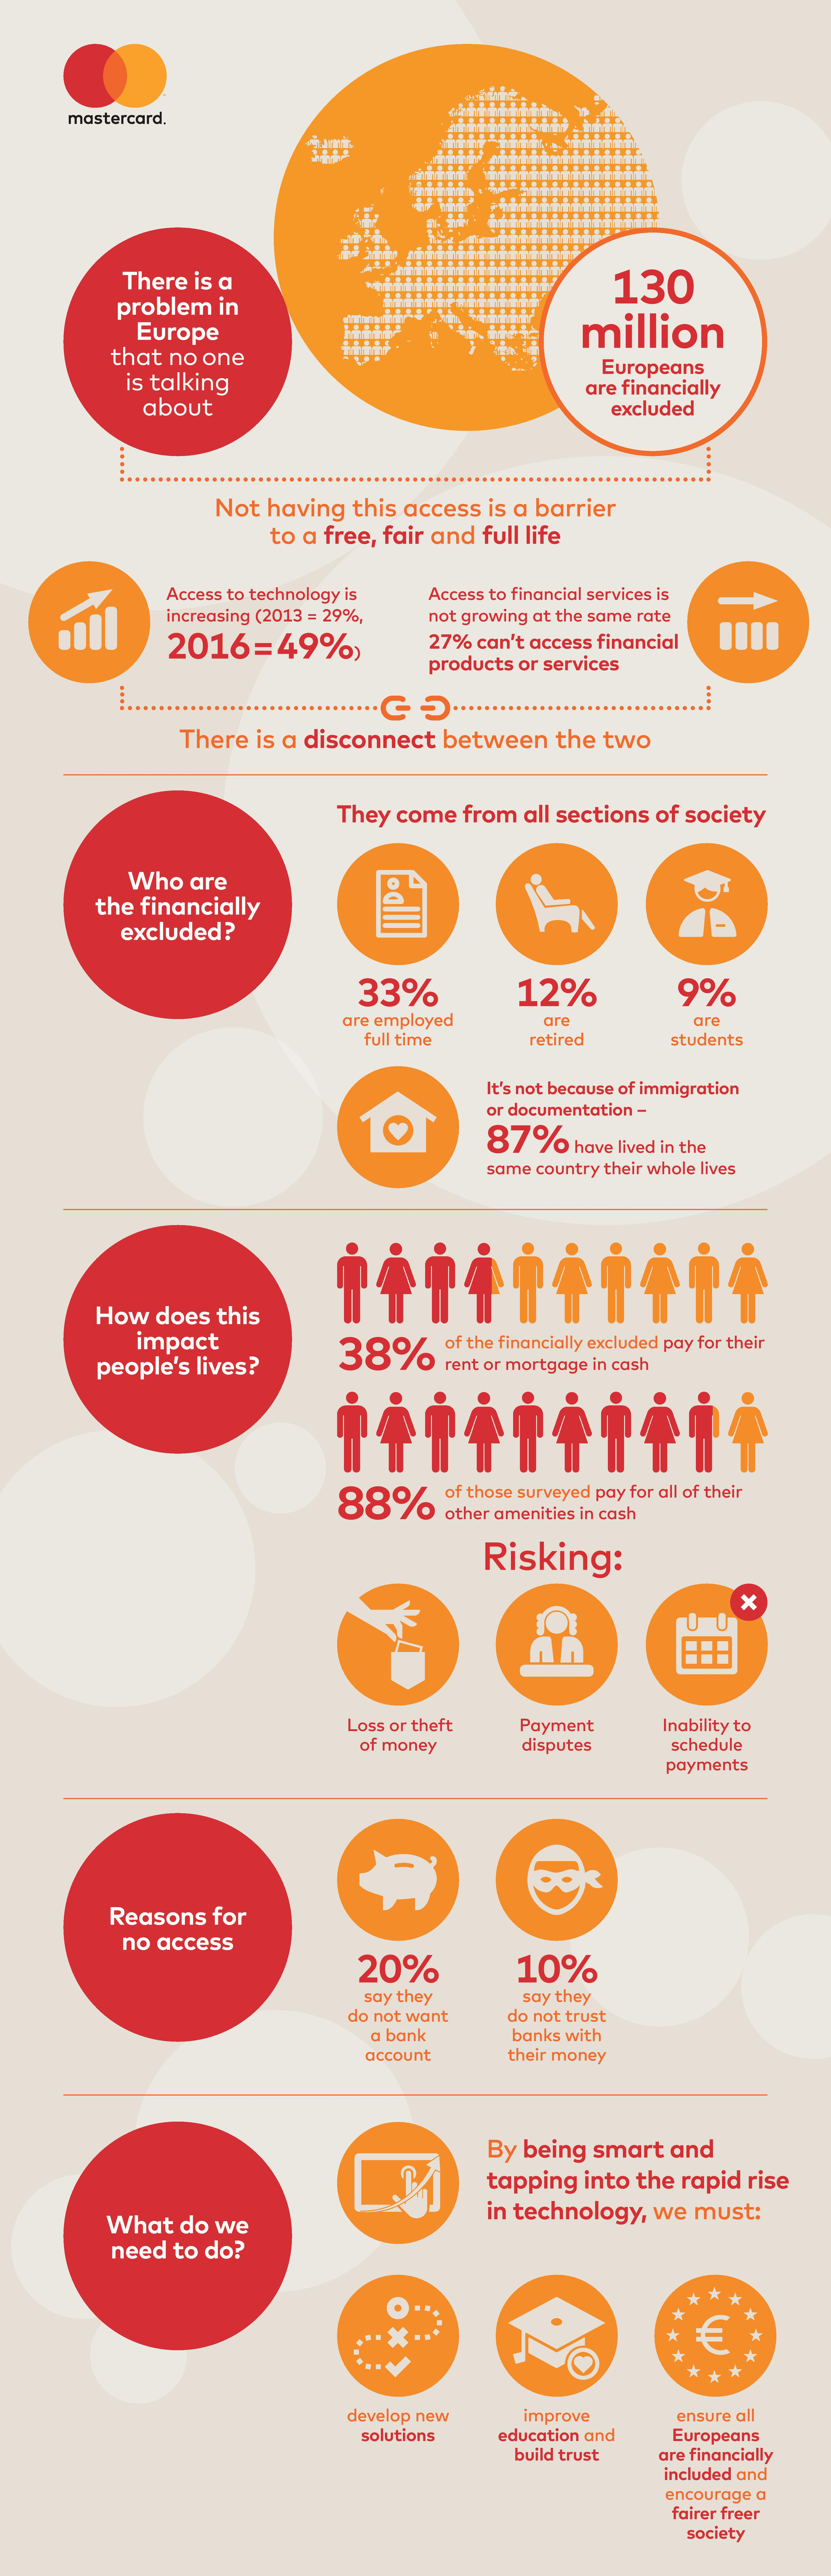 mastercard-financial-inclusion-infographic-page-001